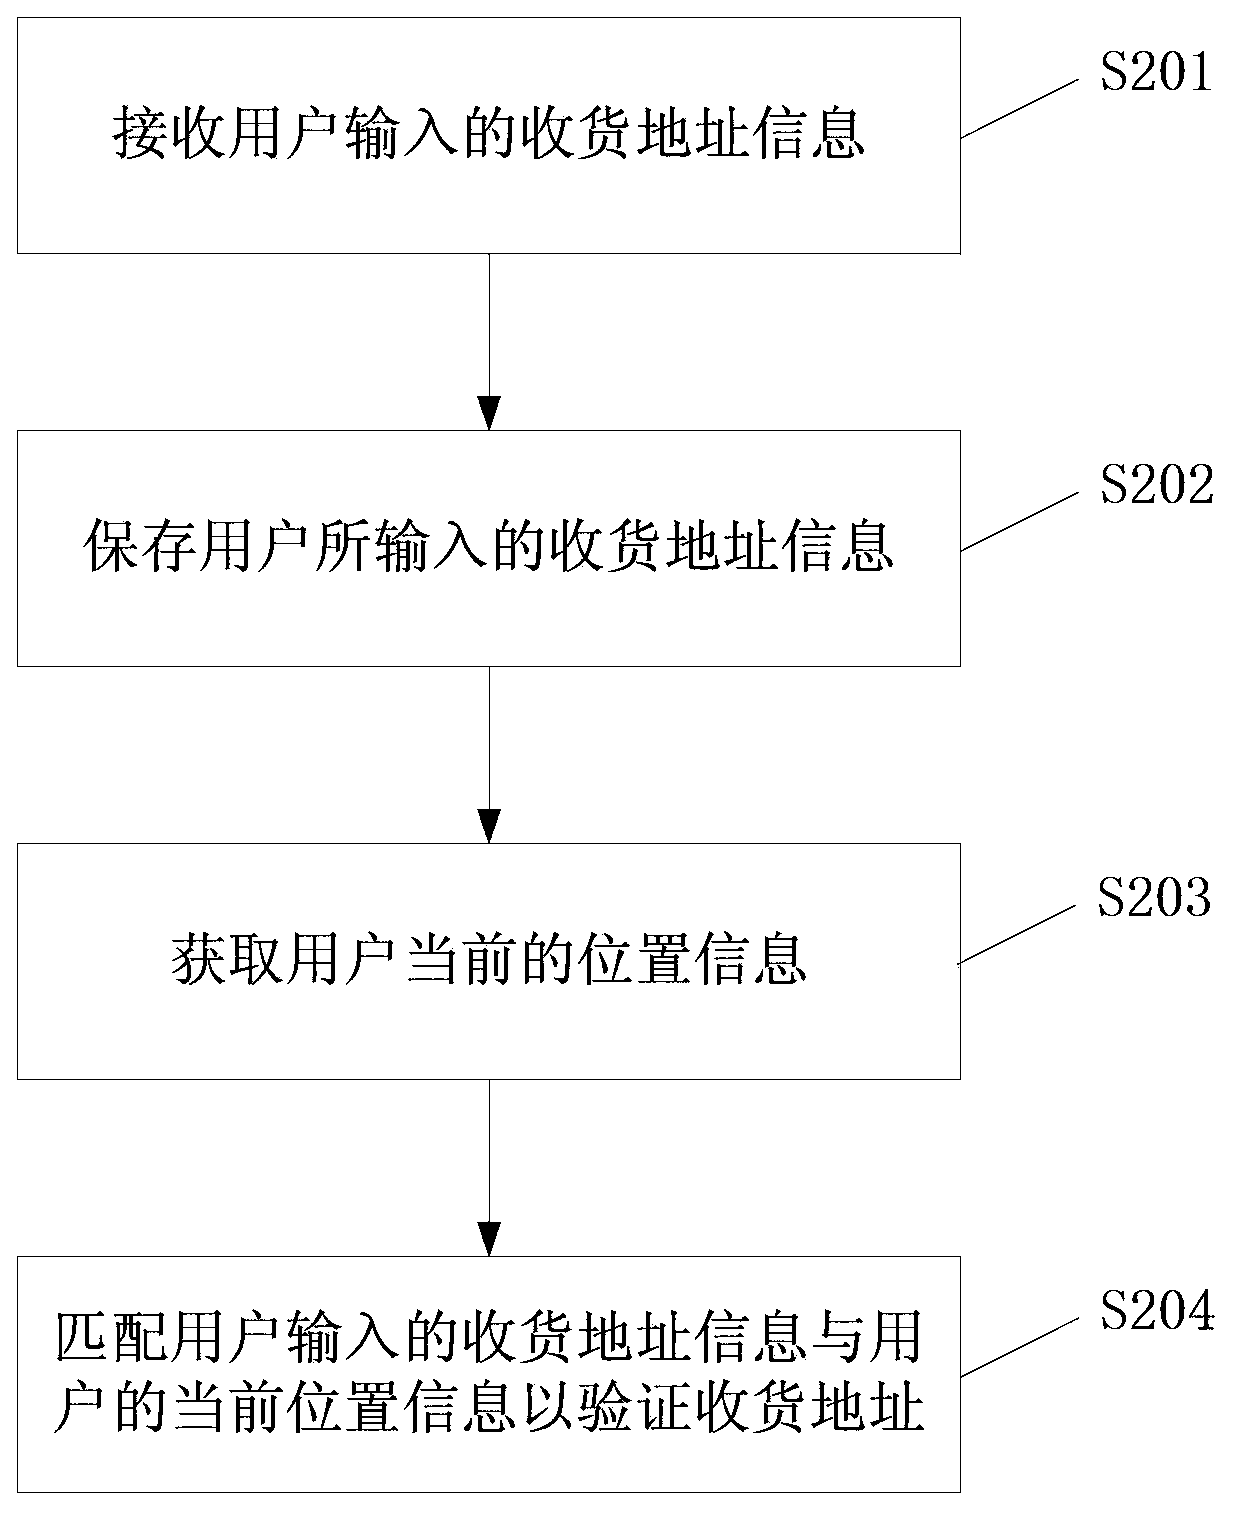 Receiving address error correction method and system